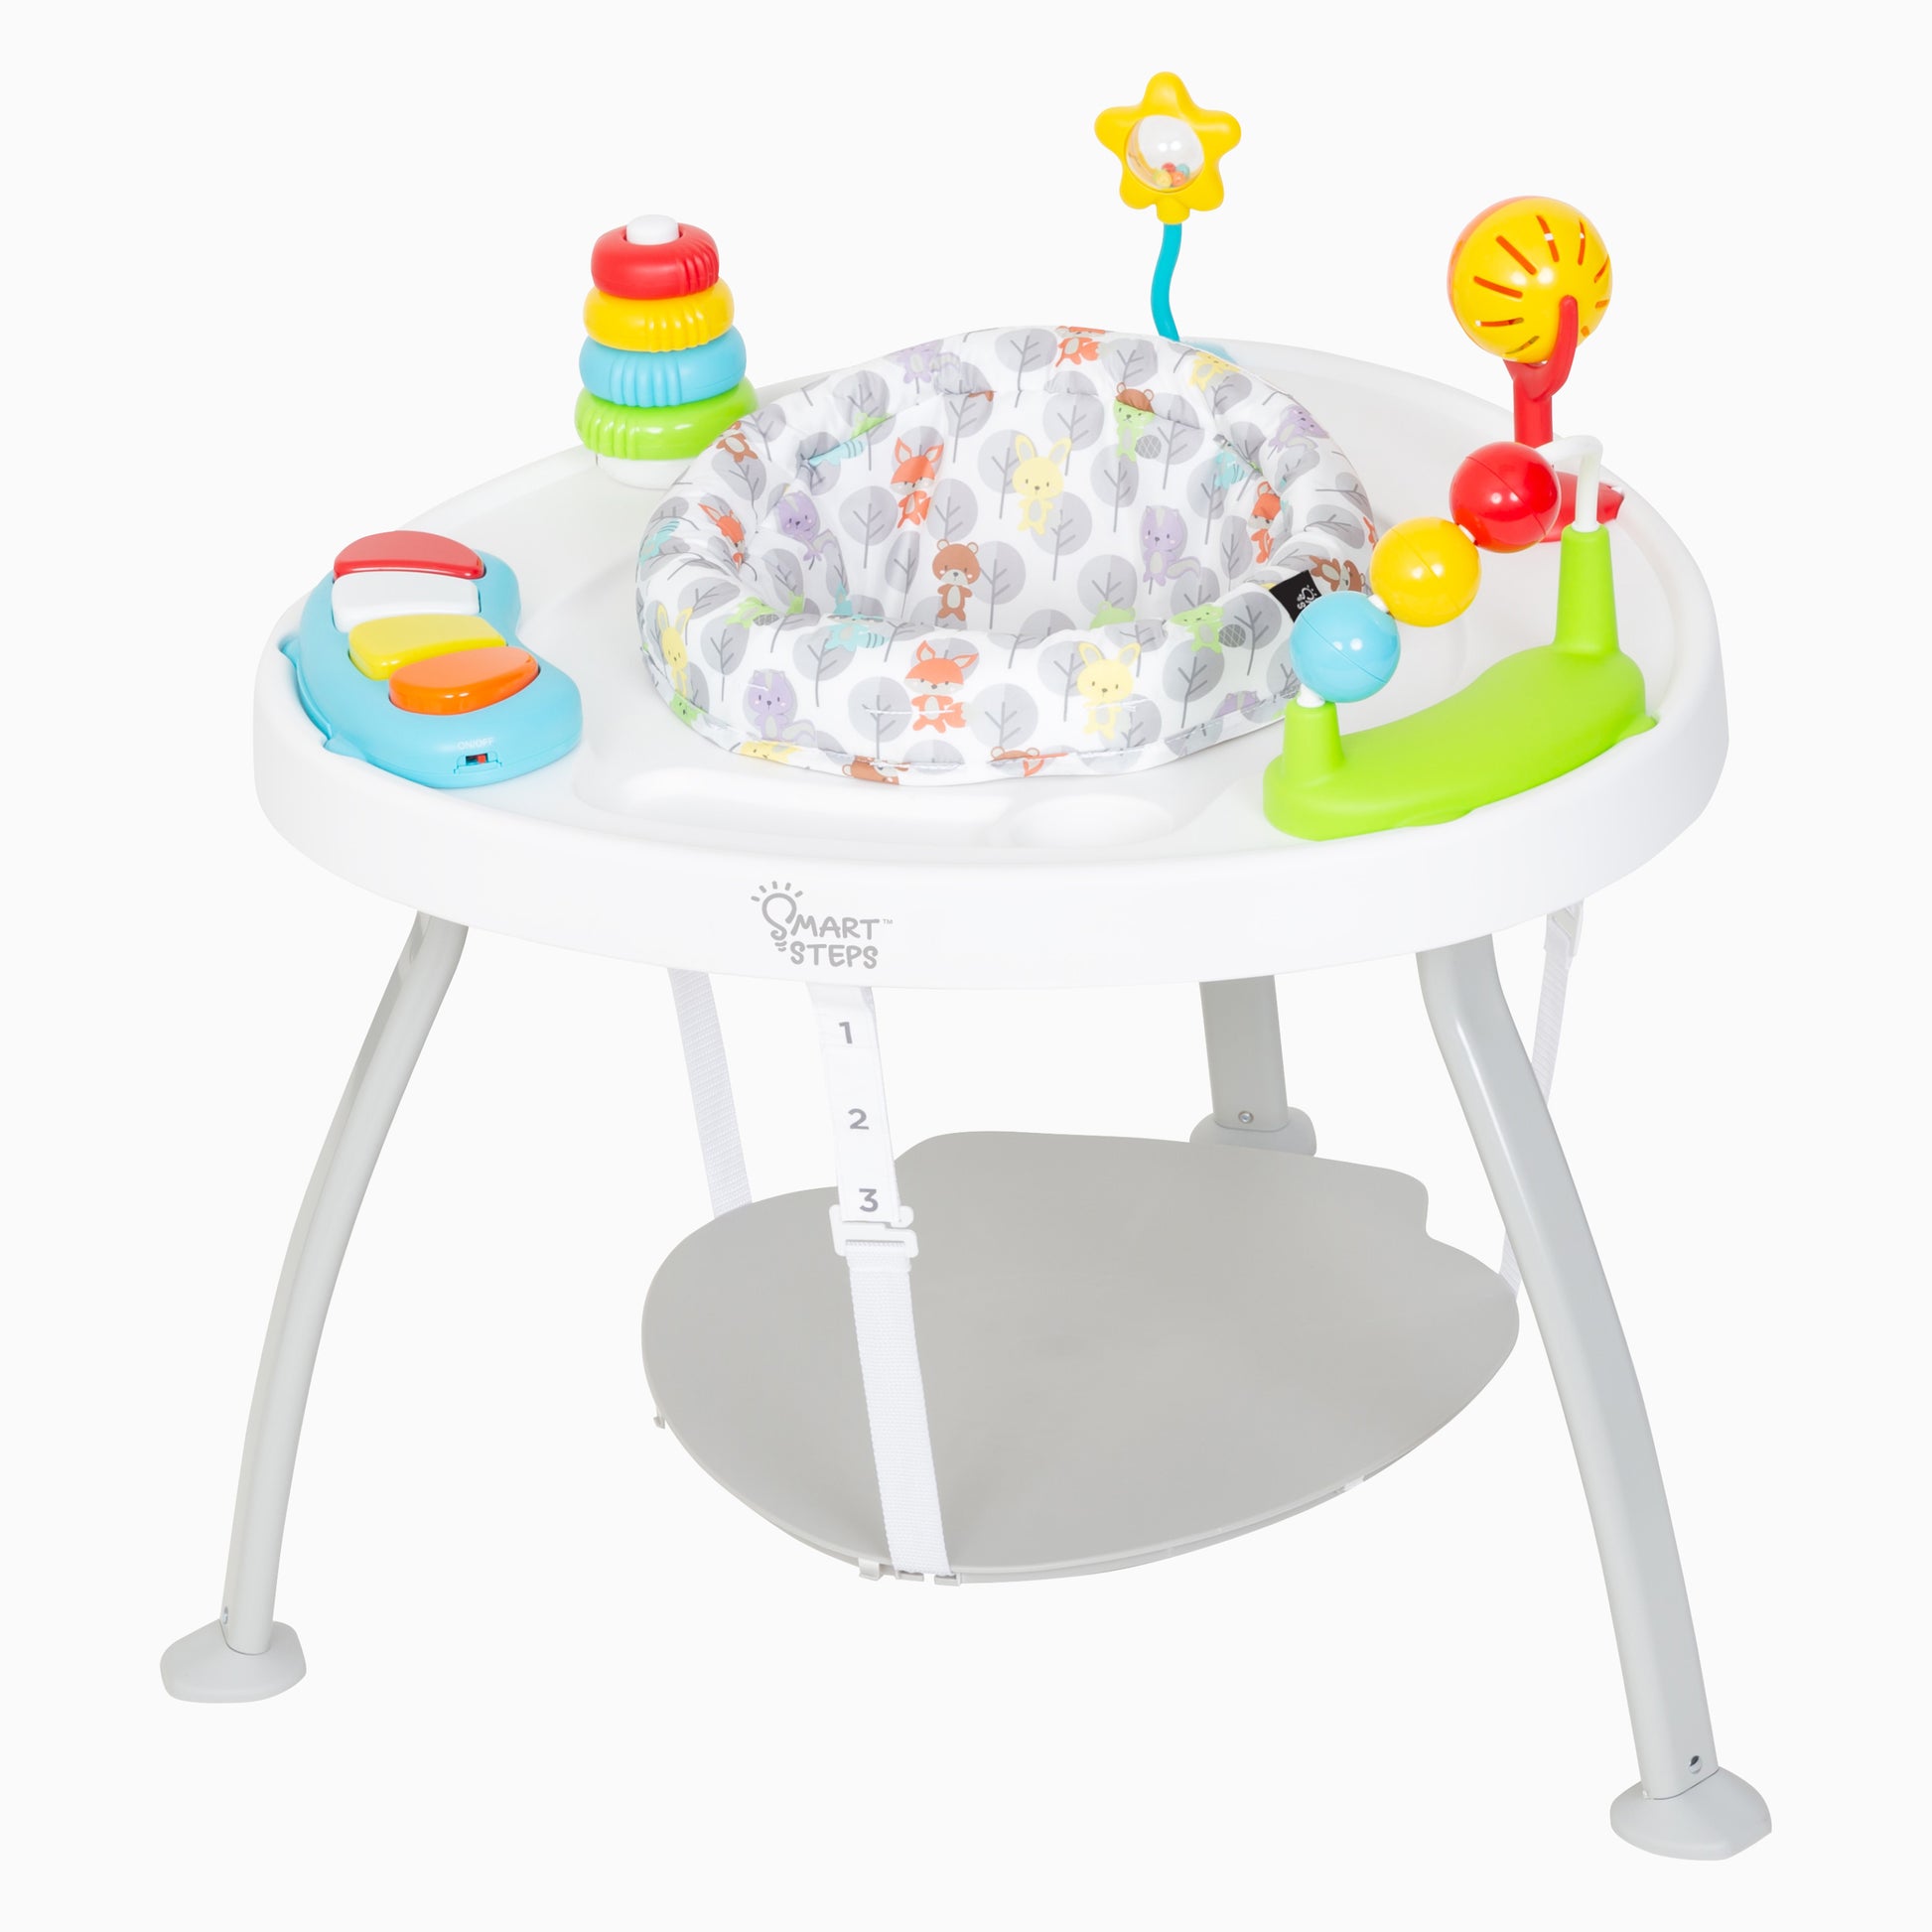 Smart Steps by Baby Trend Bounce N’ Play 3-in-1 Activity Center